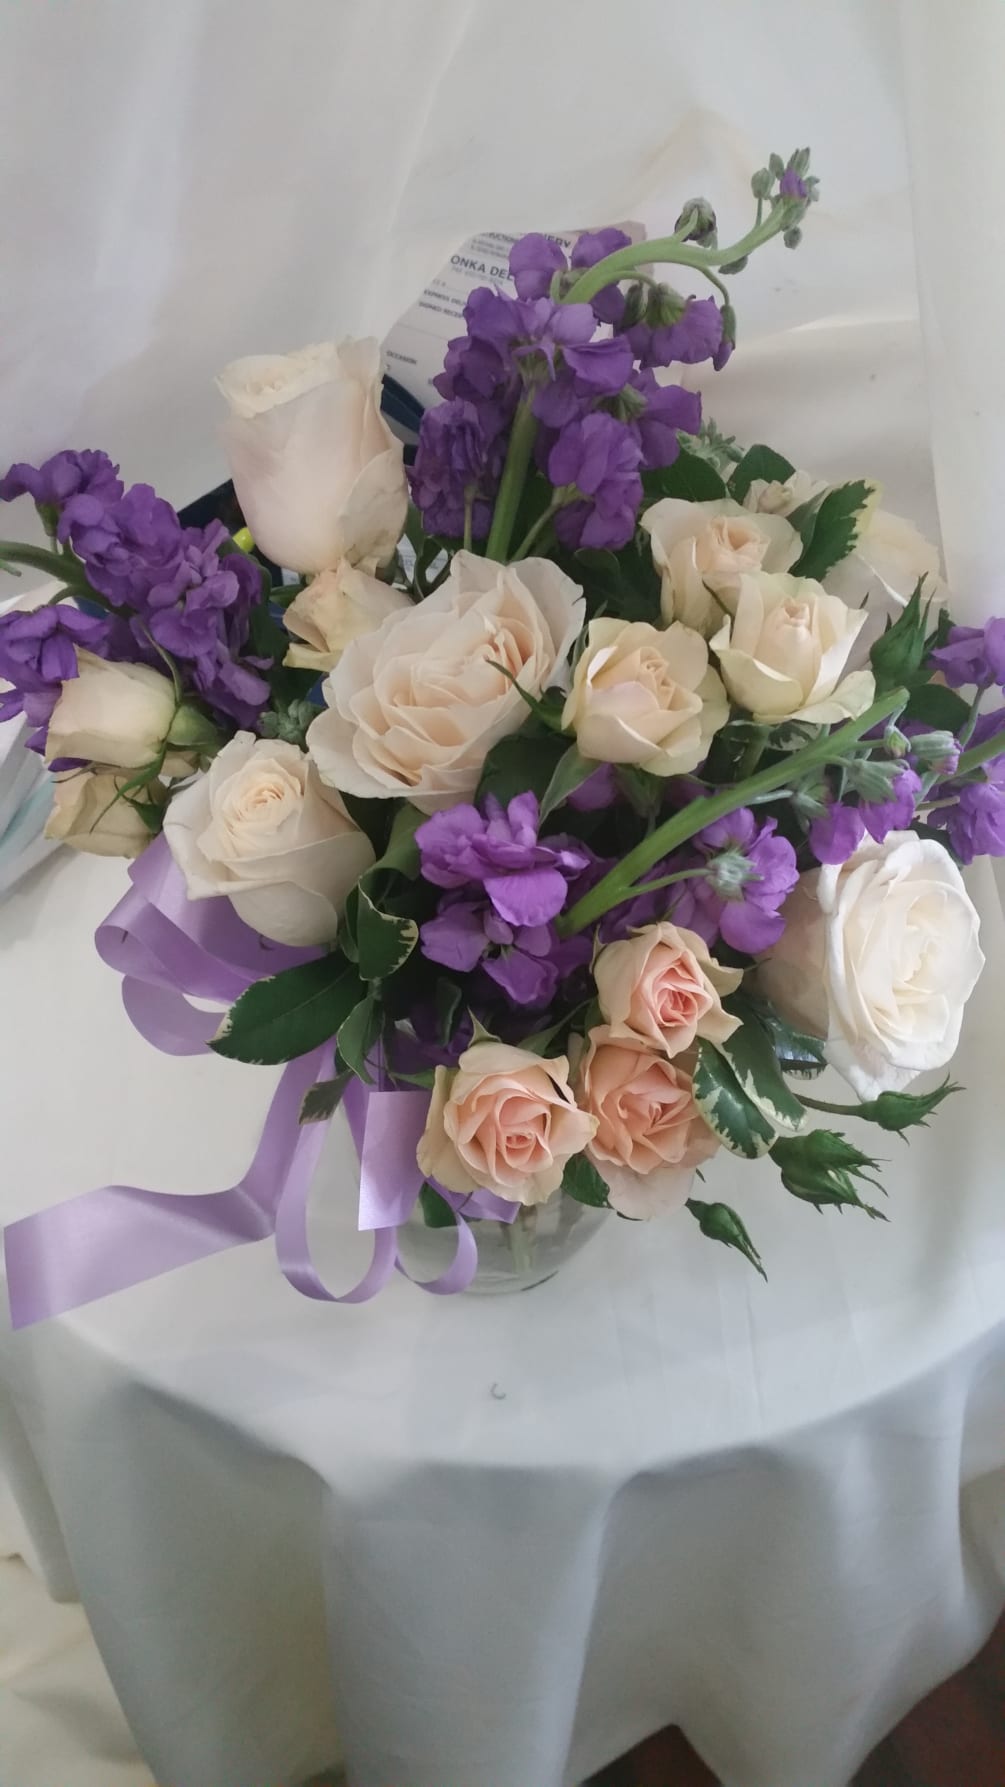 Purple snapdragons, peach roses and white roses in a glass vase with